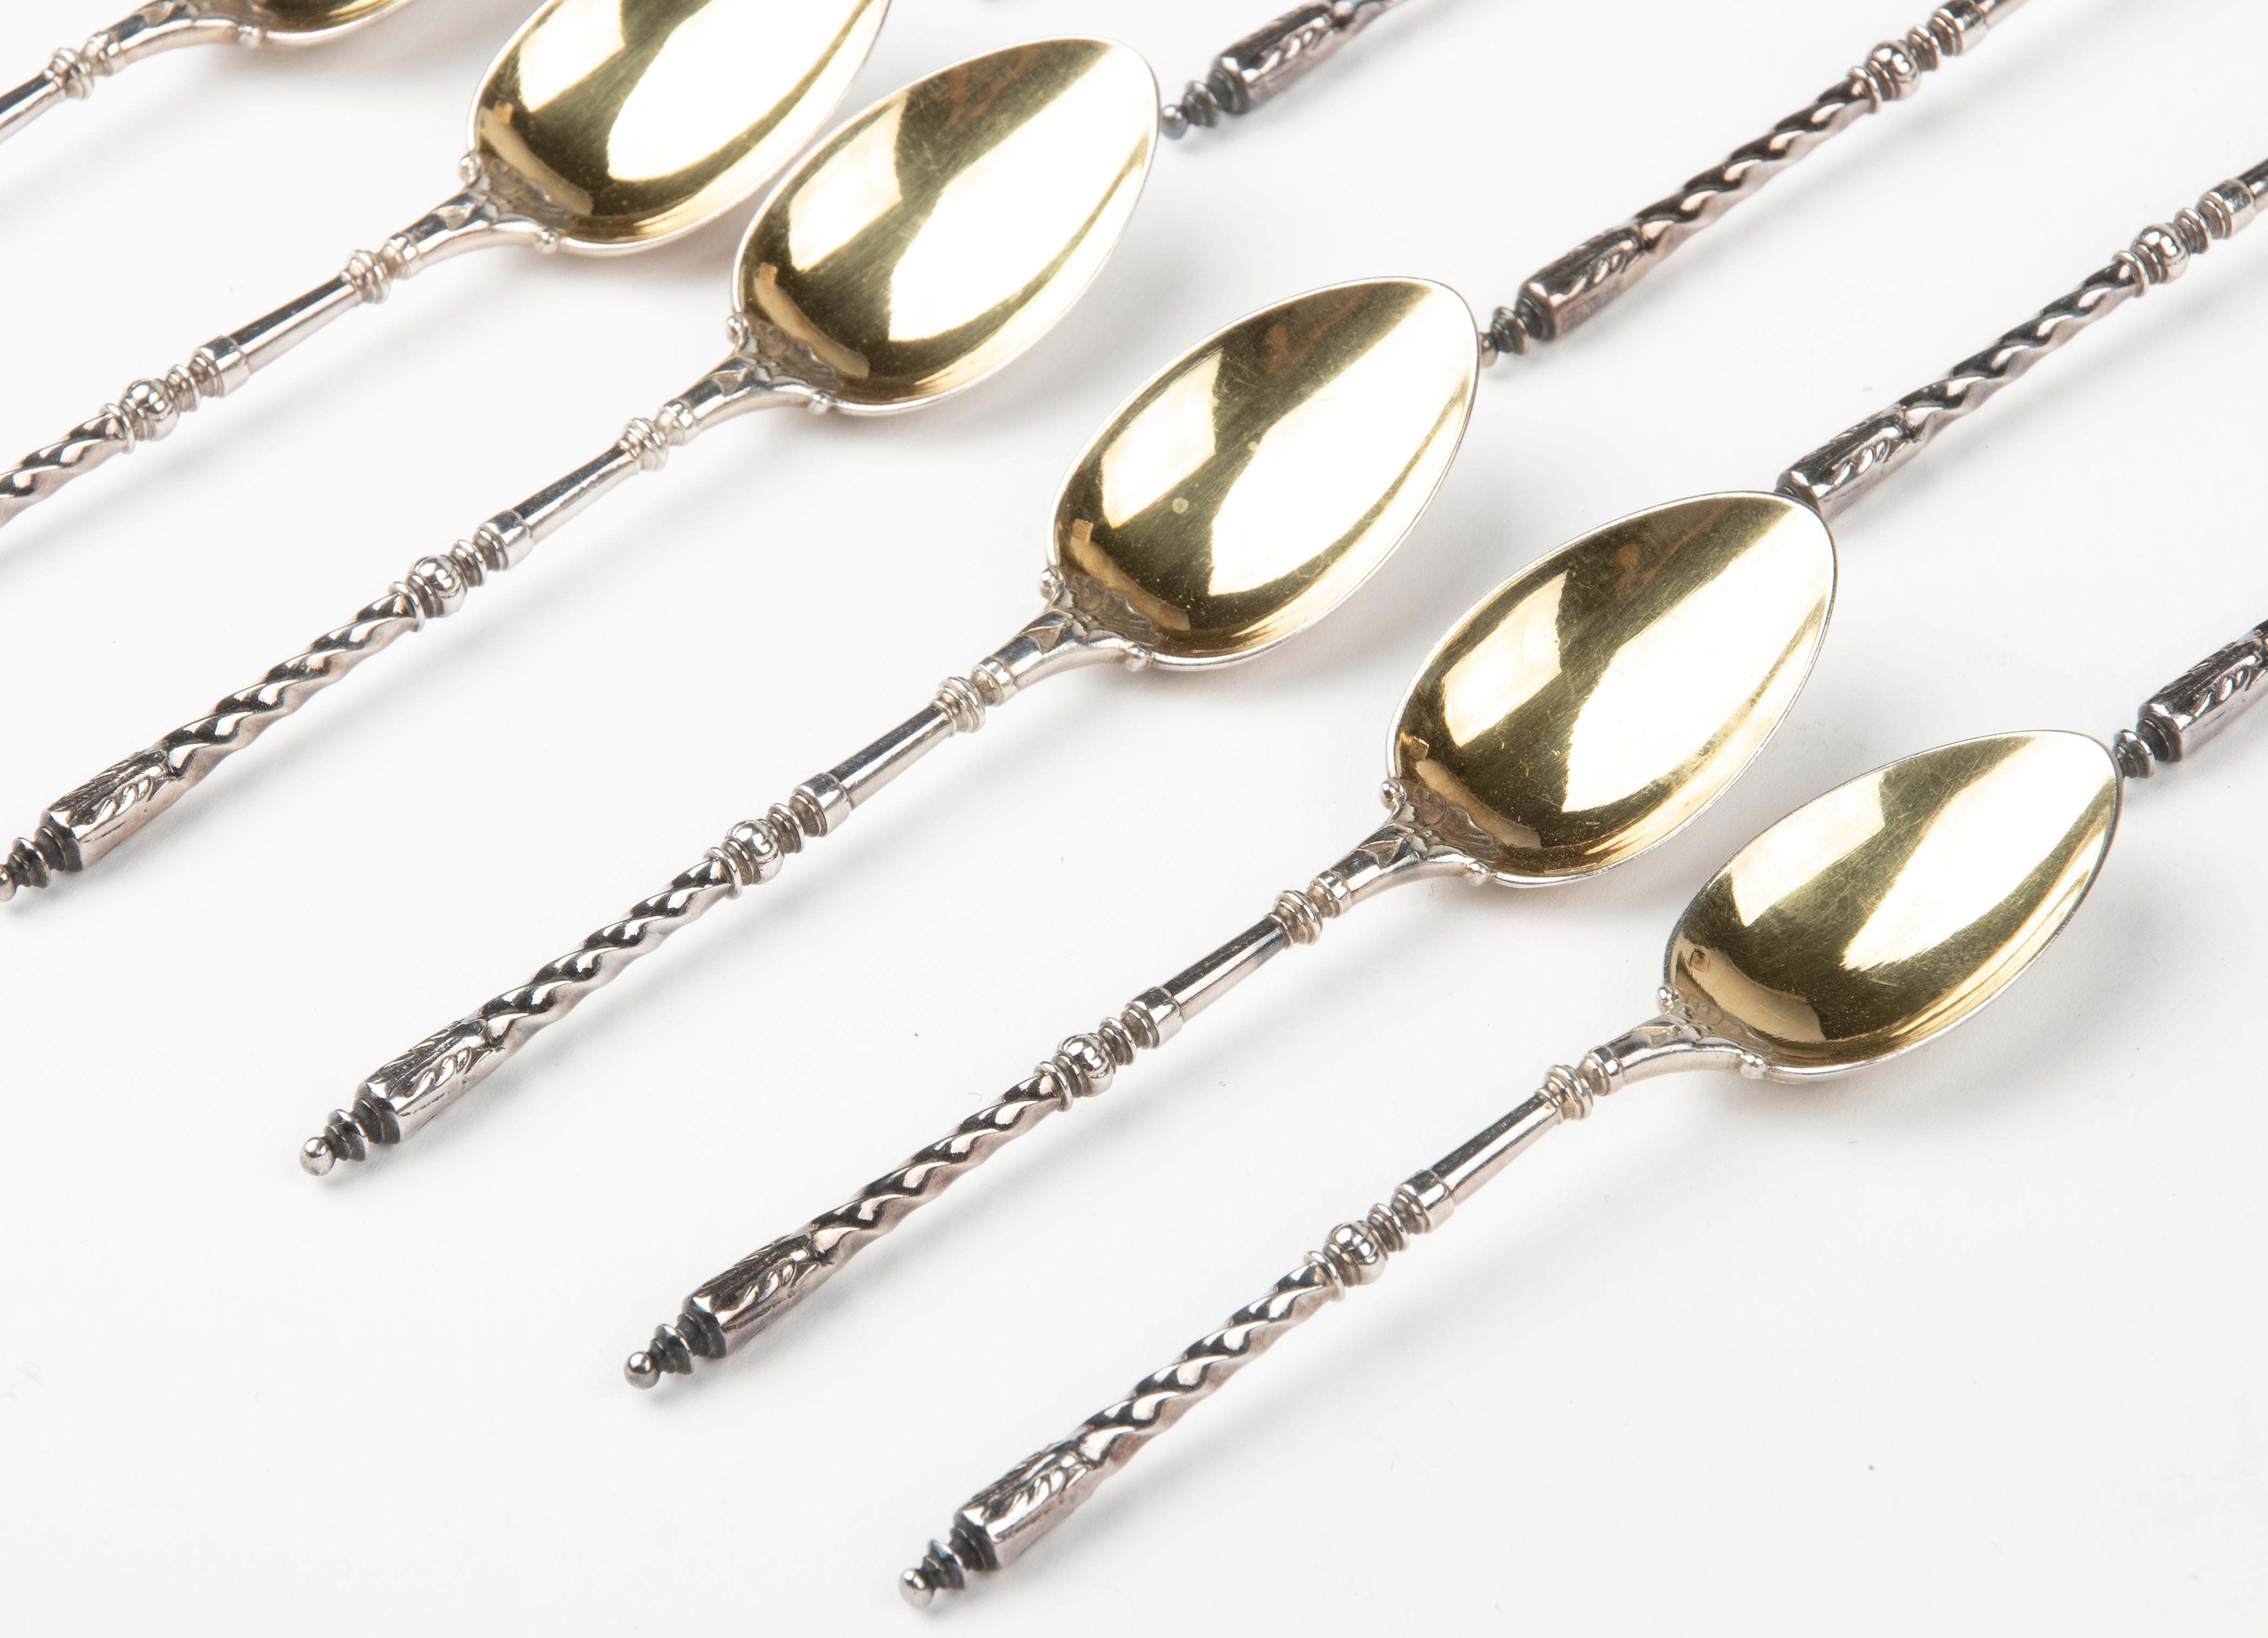 Belle Époque Set of 12 Antique Silver-Plated and Gilded Tea spoons made by Christofle For Sale